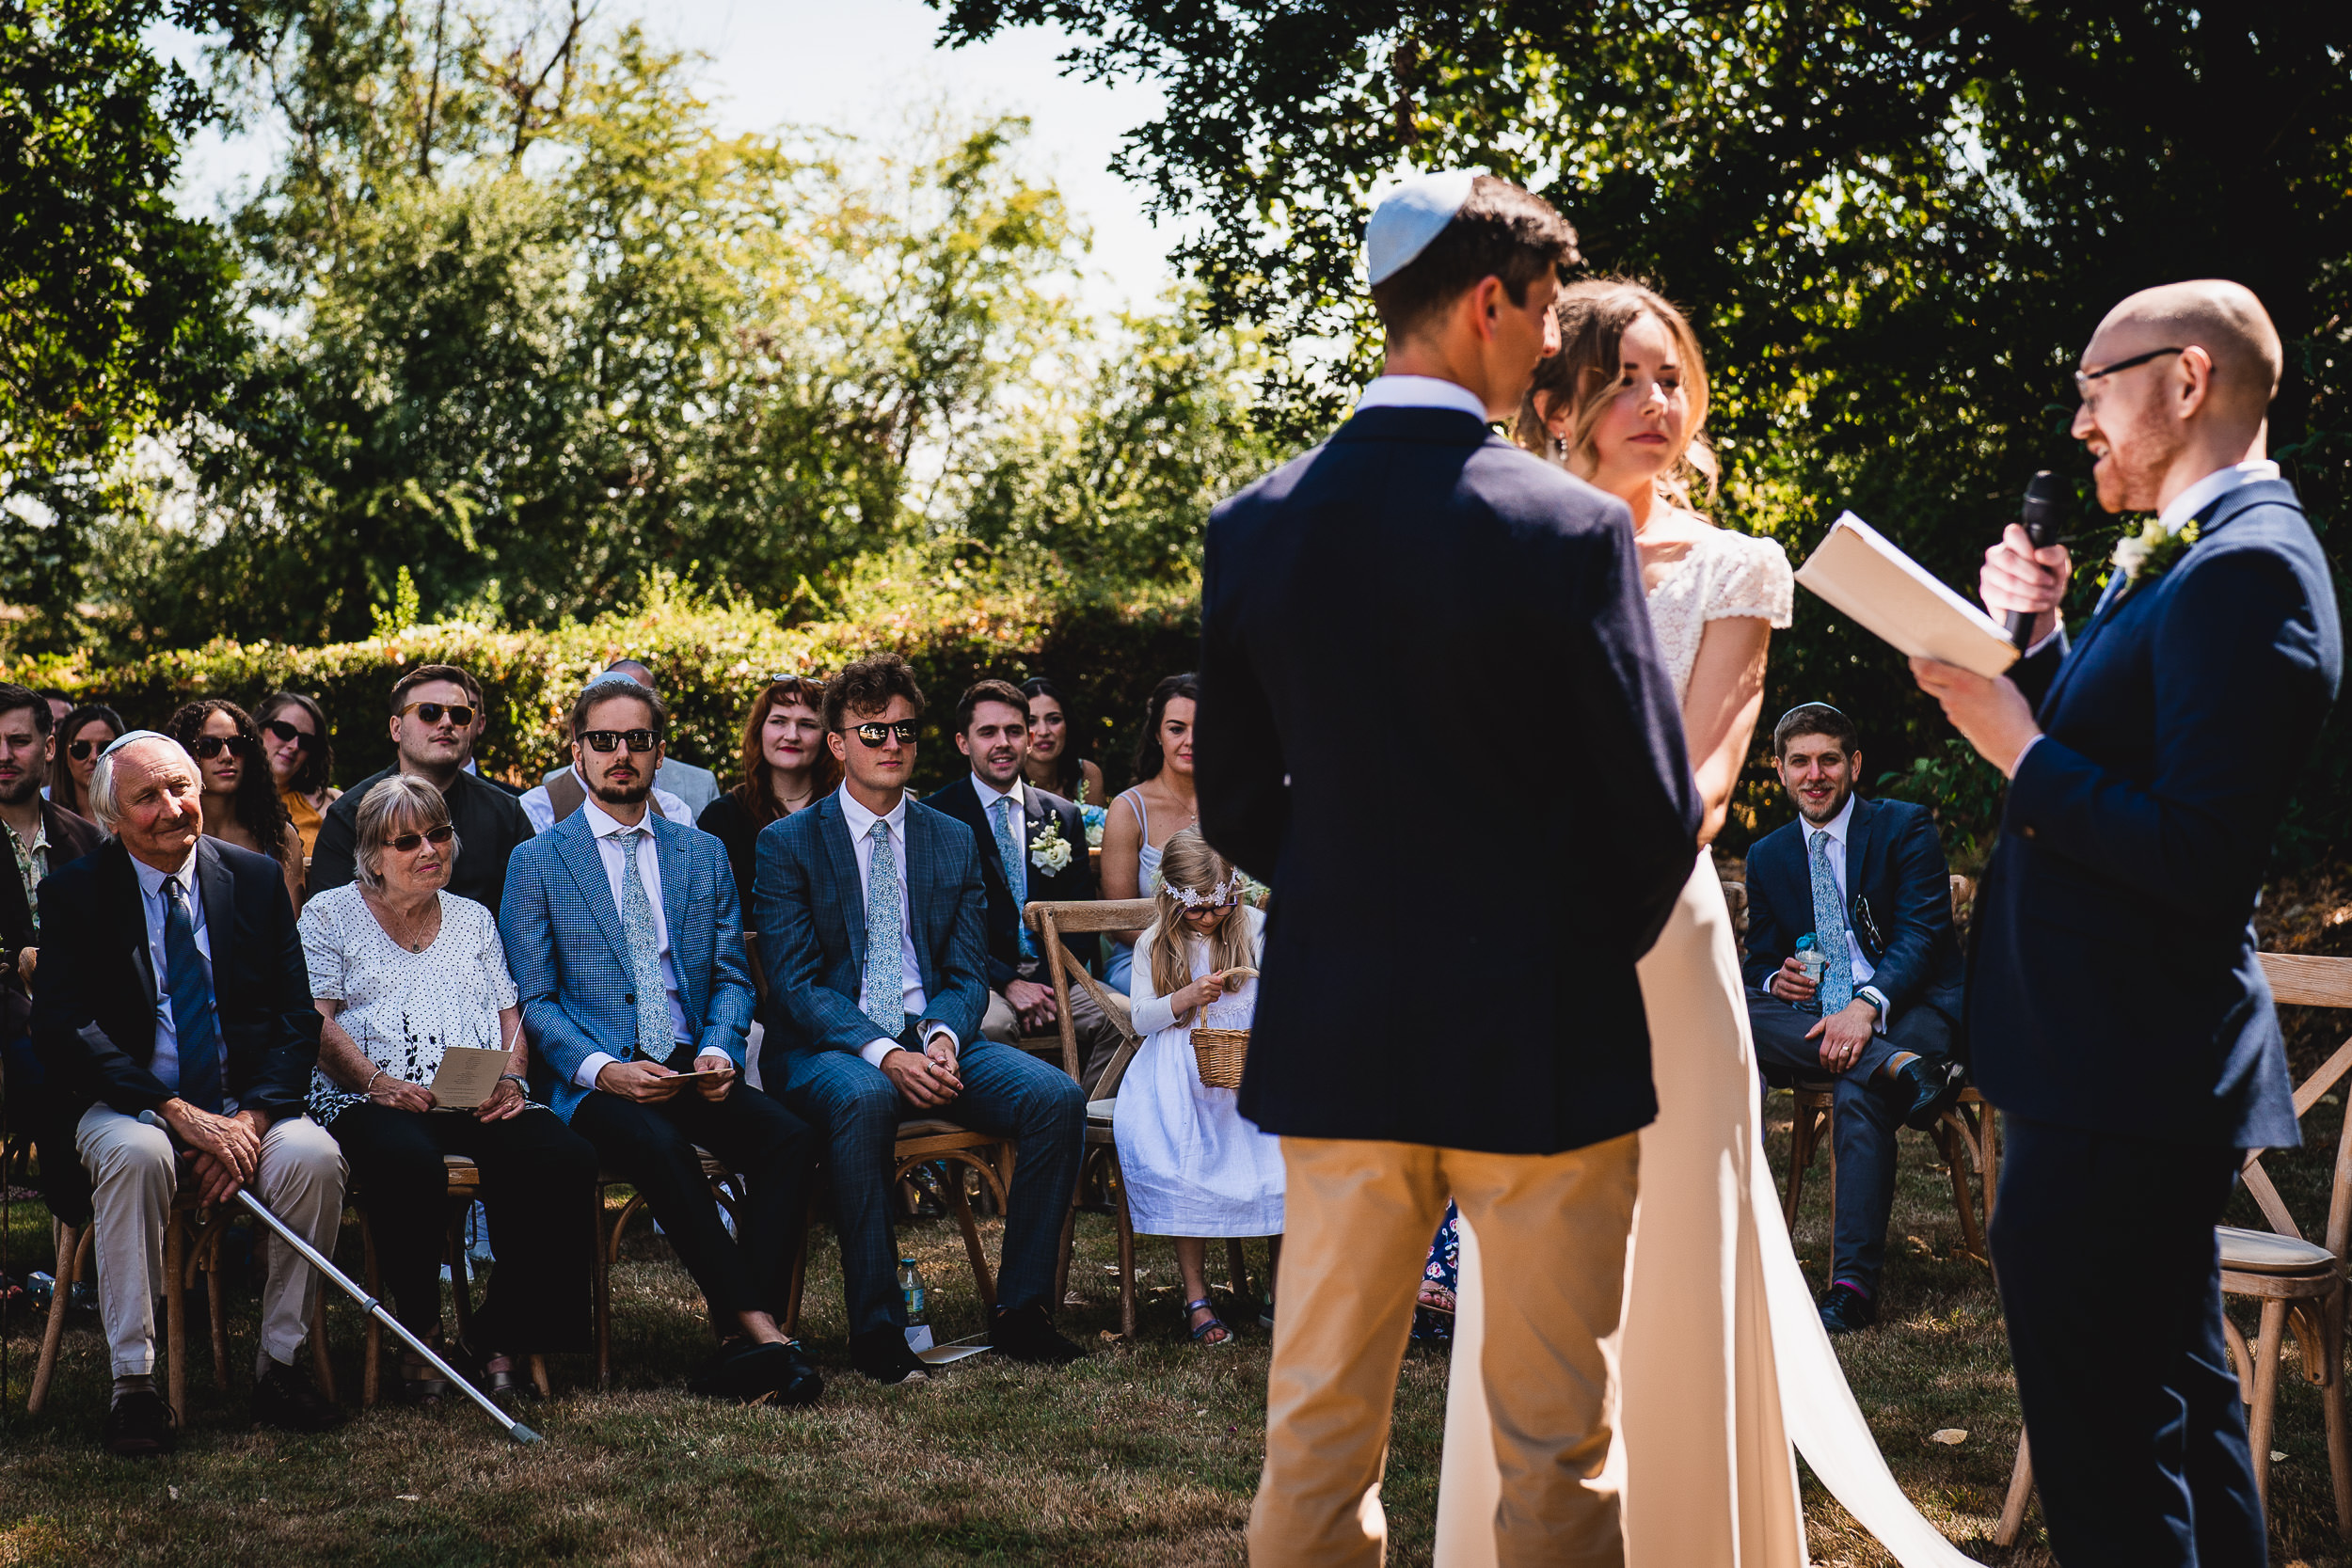 A bride and groom exchange vows in a picturesque outdoor wedding ceremony, captured in a stunning wedding photo.